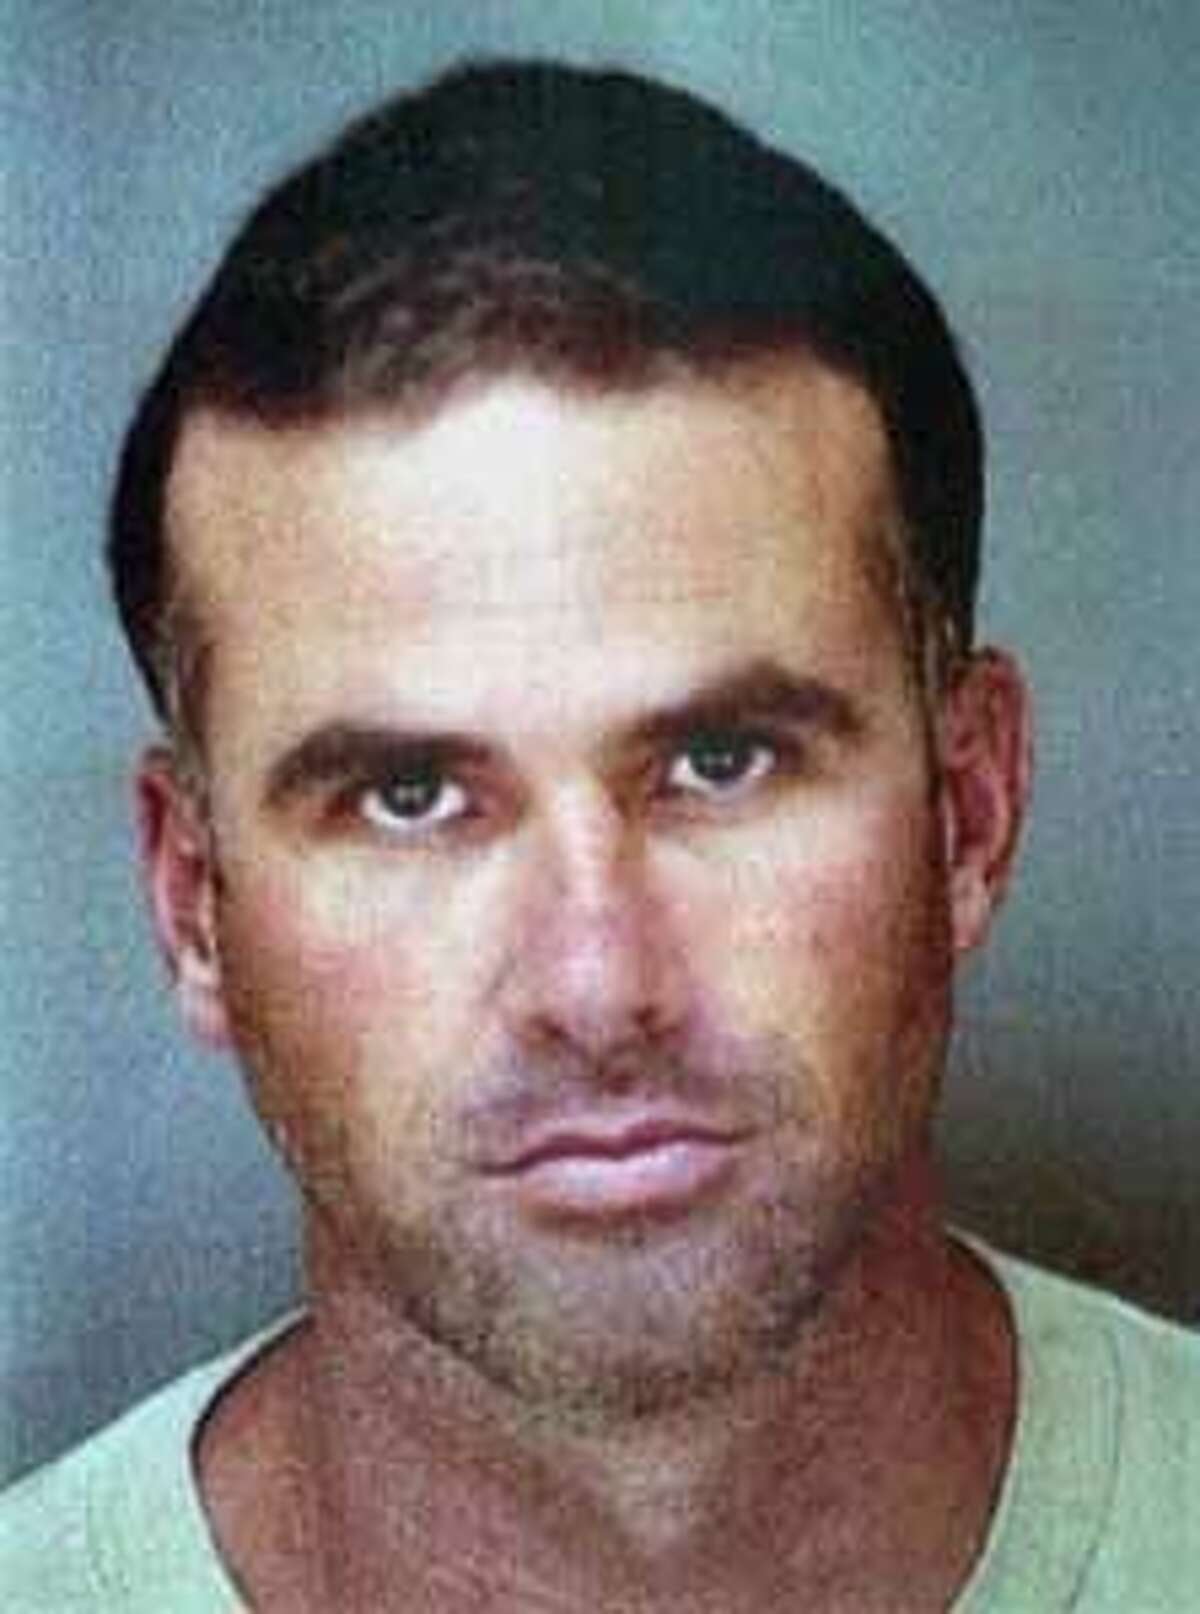 FILE--Motel handyman Cary Stayner shown in this July 29, 1999 booking mug, was charged Wednesday, Oct. 20, 1999 with capital murder in the killings of three Yosemite sightseers. The complaint filed by Mariposa County District Attorney Christine Johnson charges Stayner of three counts of murder as well as special circumstances that could bring the death penalty. (AP Photo/Fresno Bee)